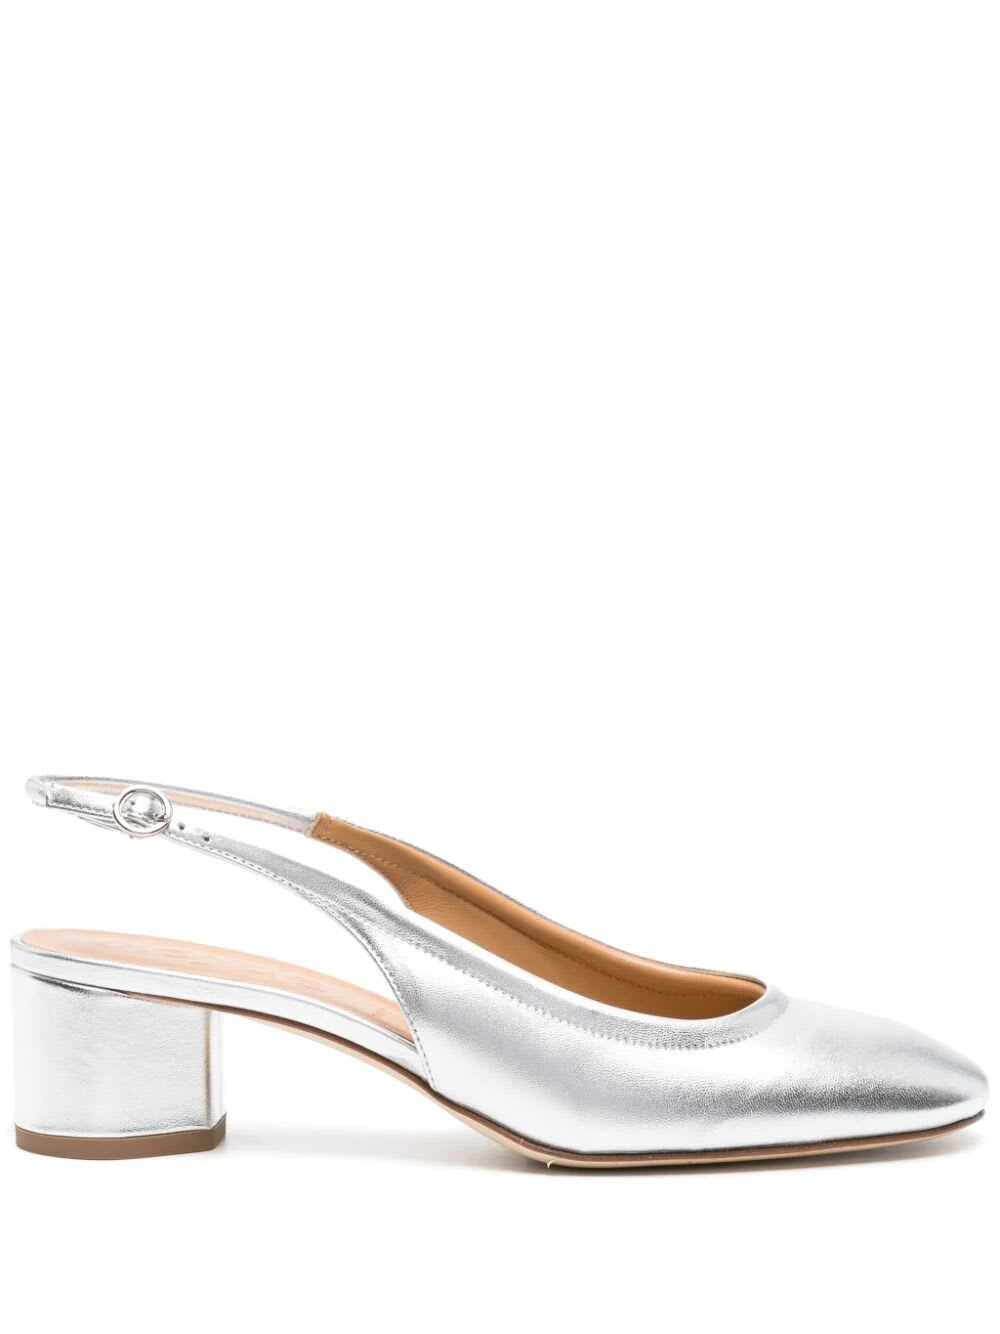 Shop Aeyde Romy Laminated Nappa Leather Silver Slingback